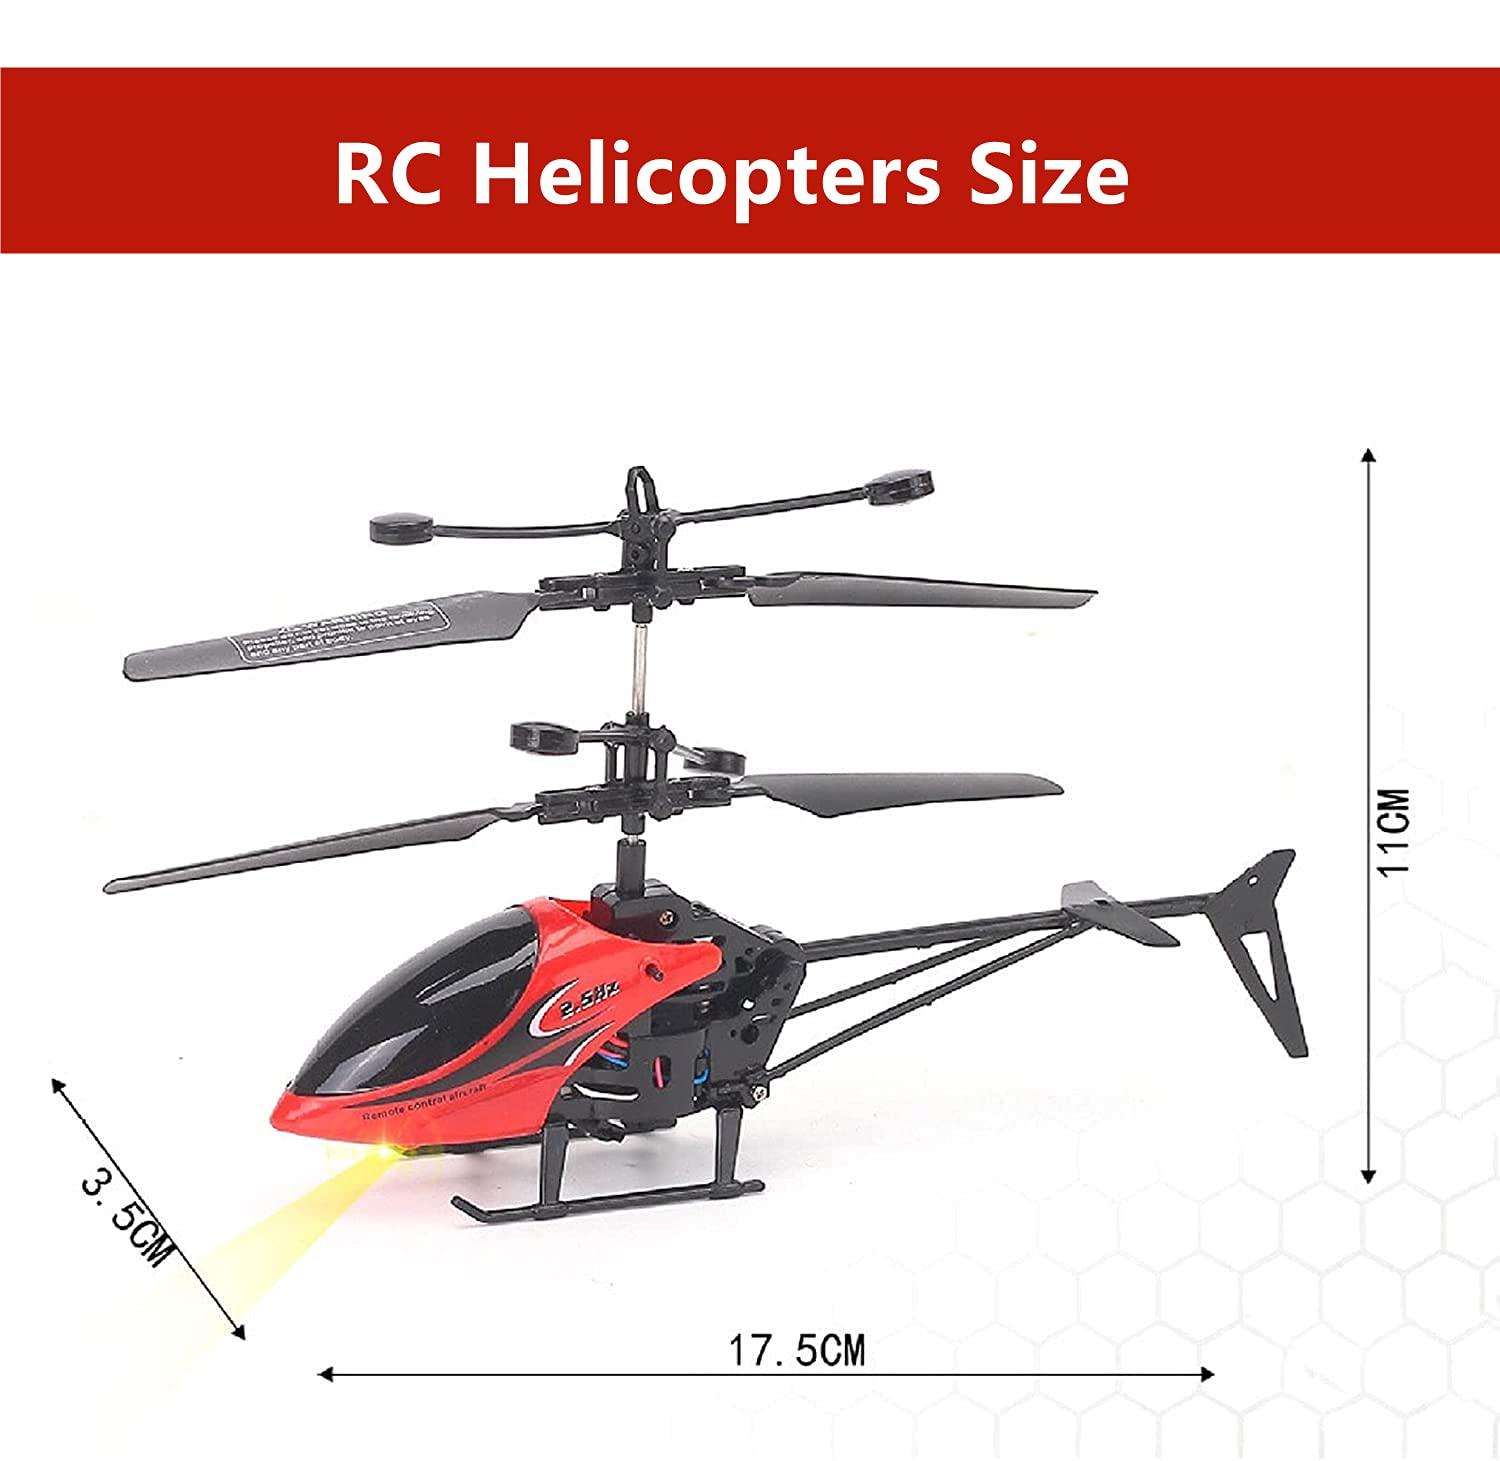 Remote Control Helicopter Below 200: Affordable and Feature-Packed RC Helicopters for Under $200